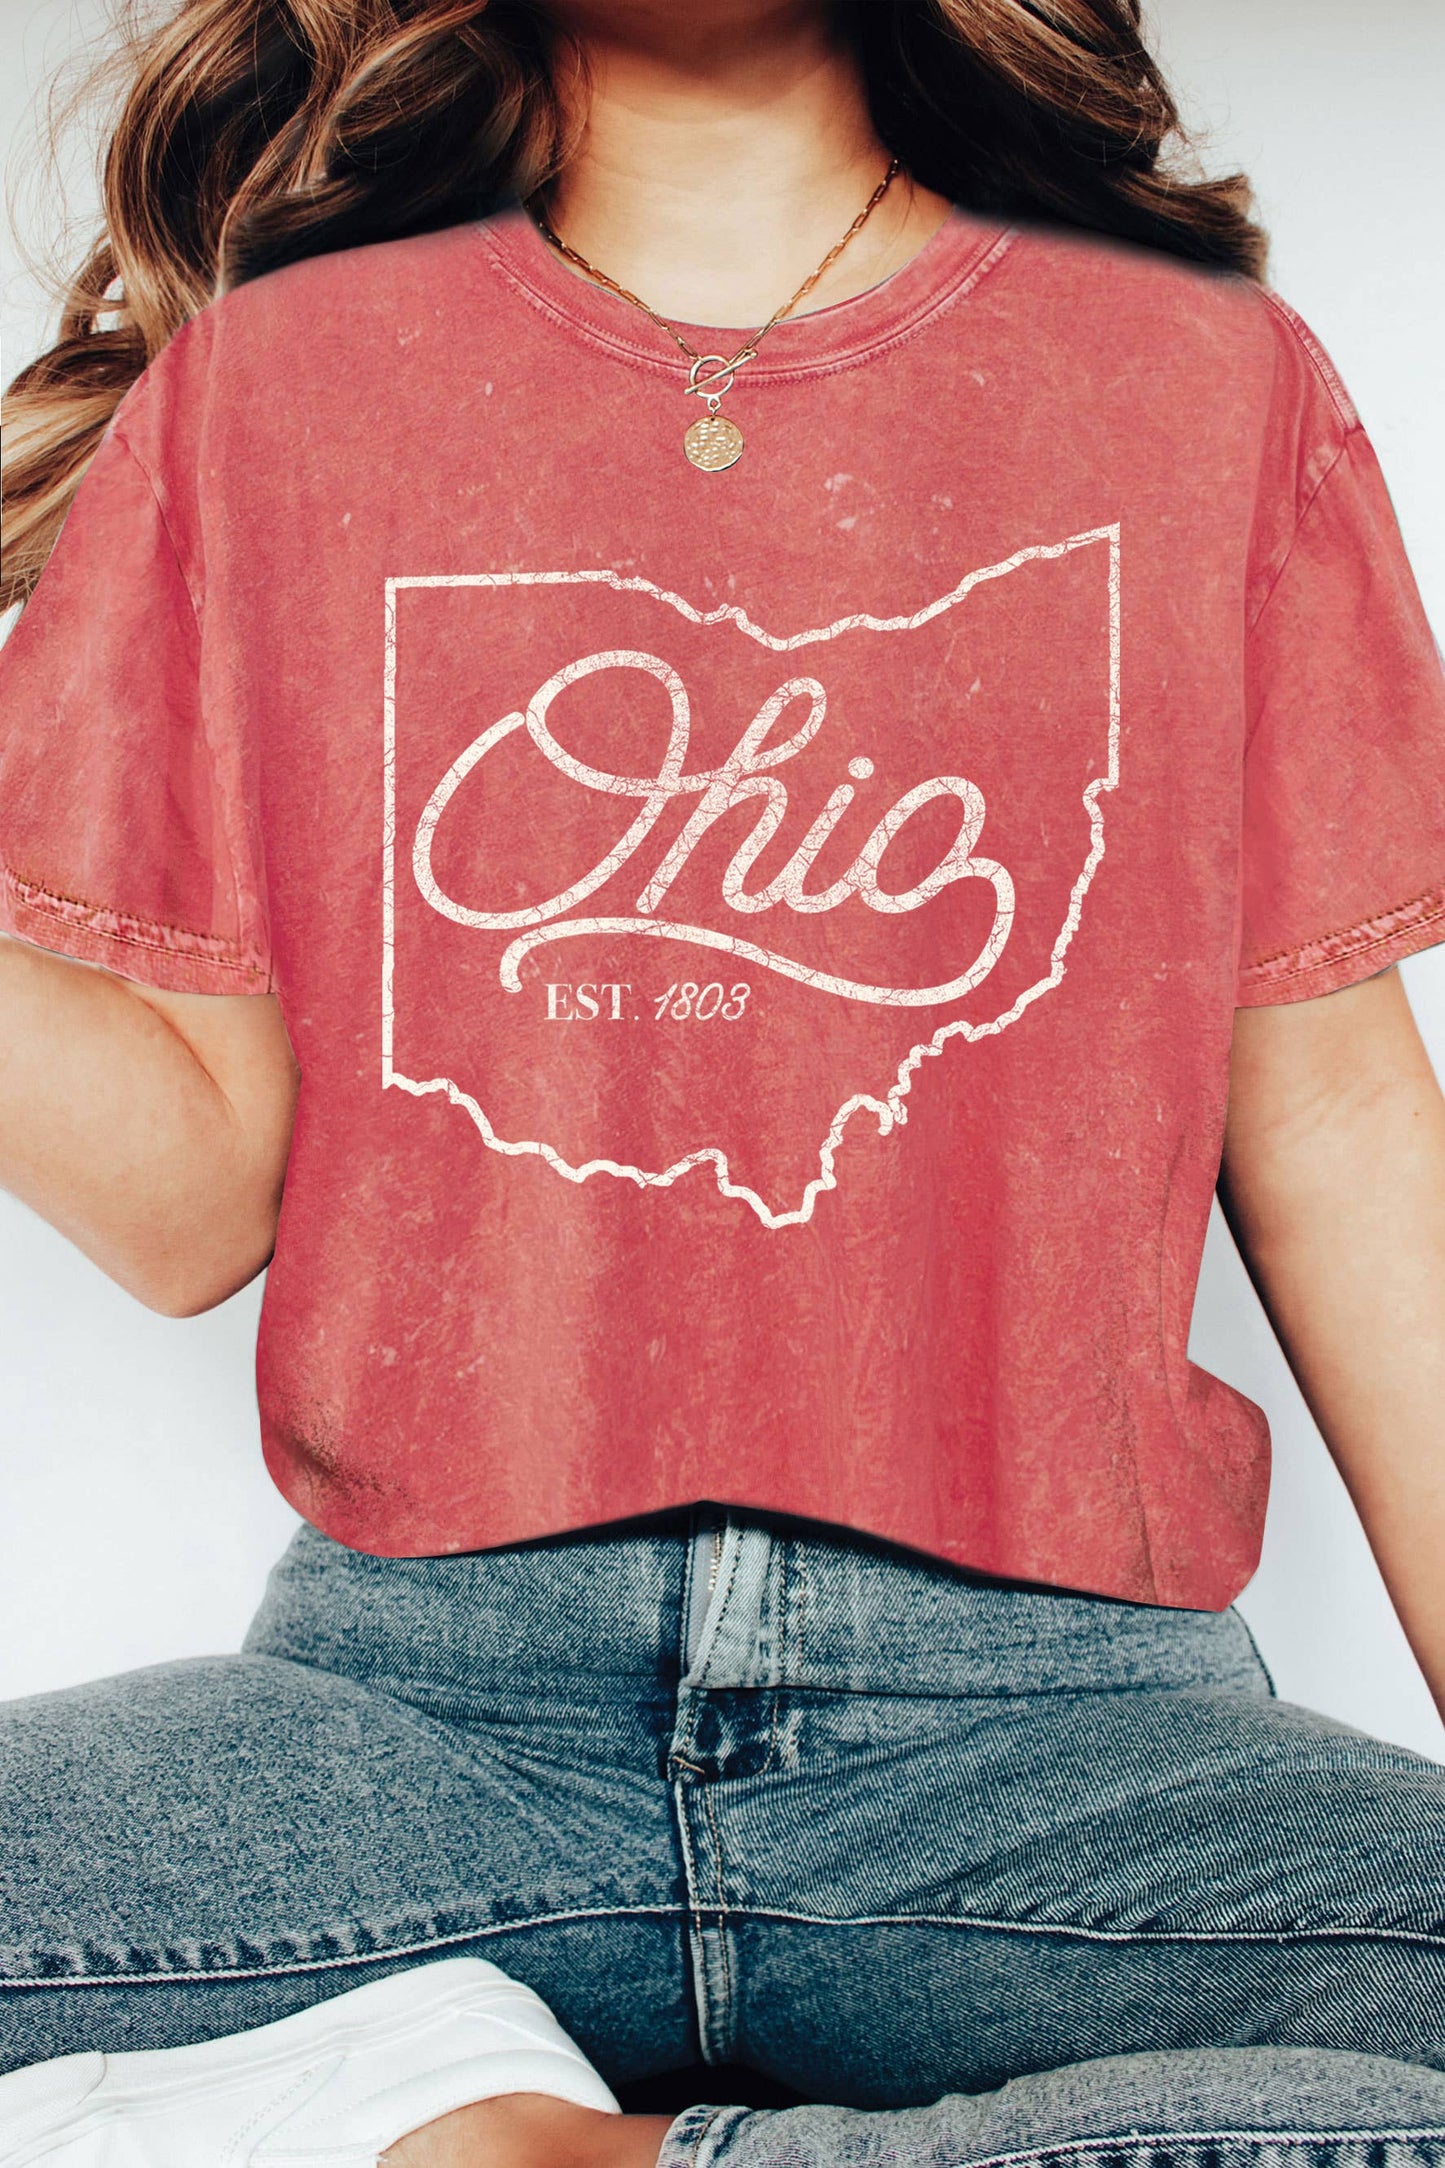 OHIO STATE PUFF MINERAL GRAPHIC TSHIRTS: TEABERRY - Storm and Sky Shoppe